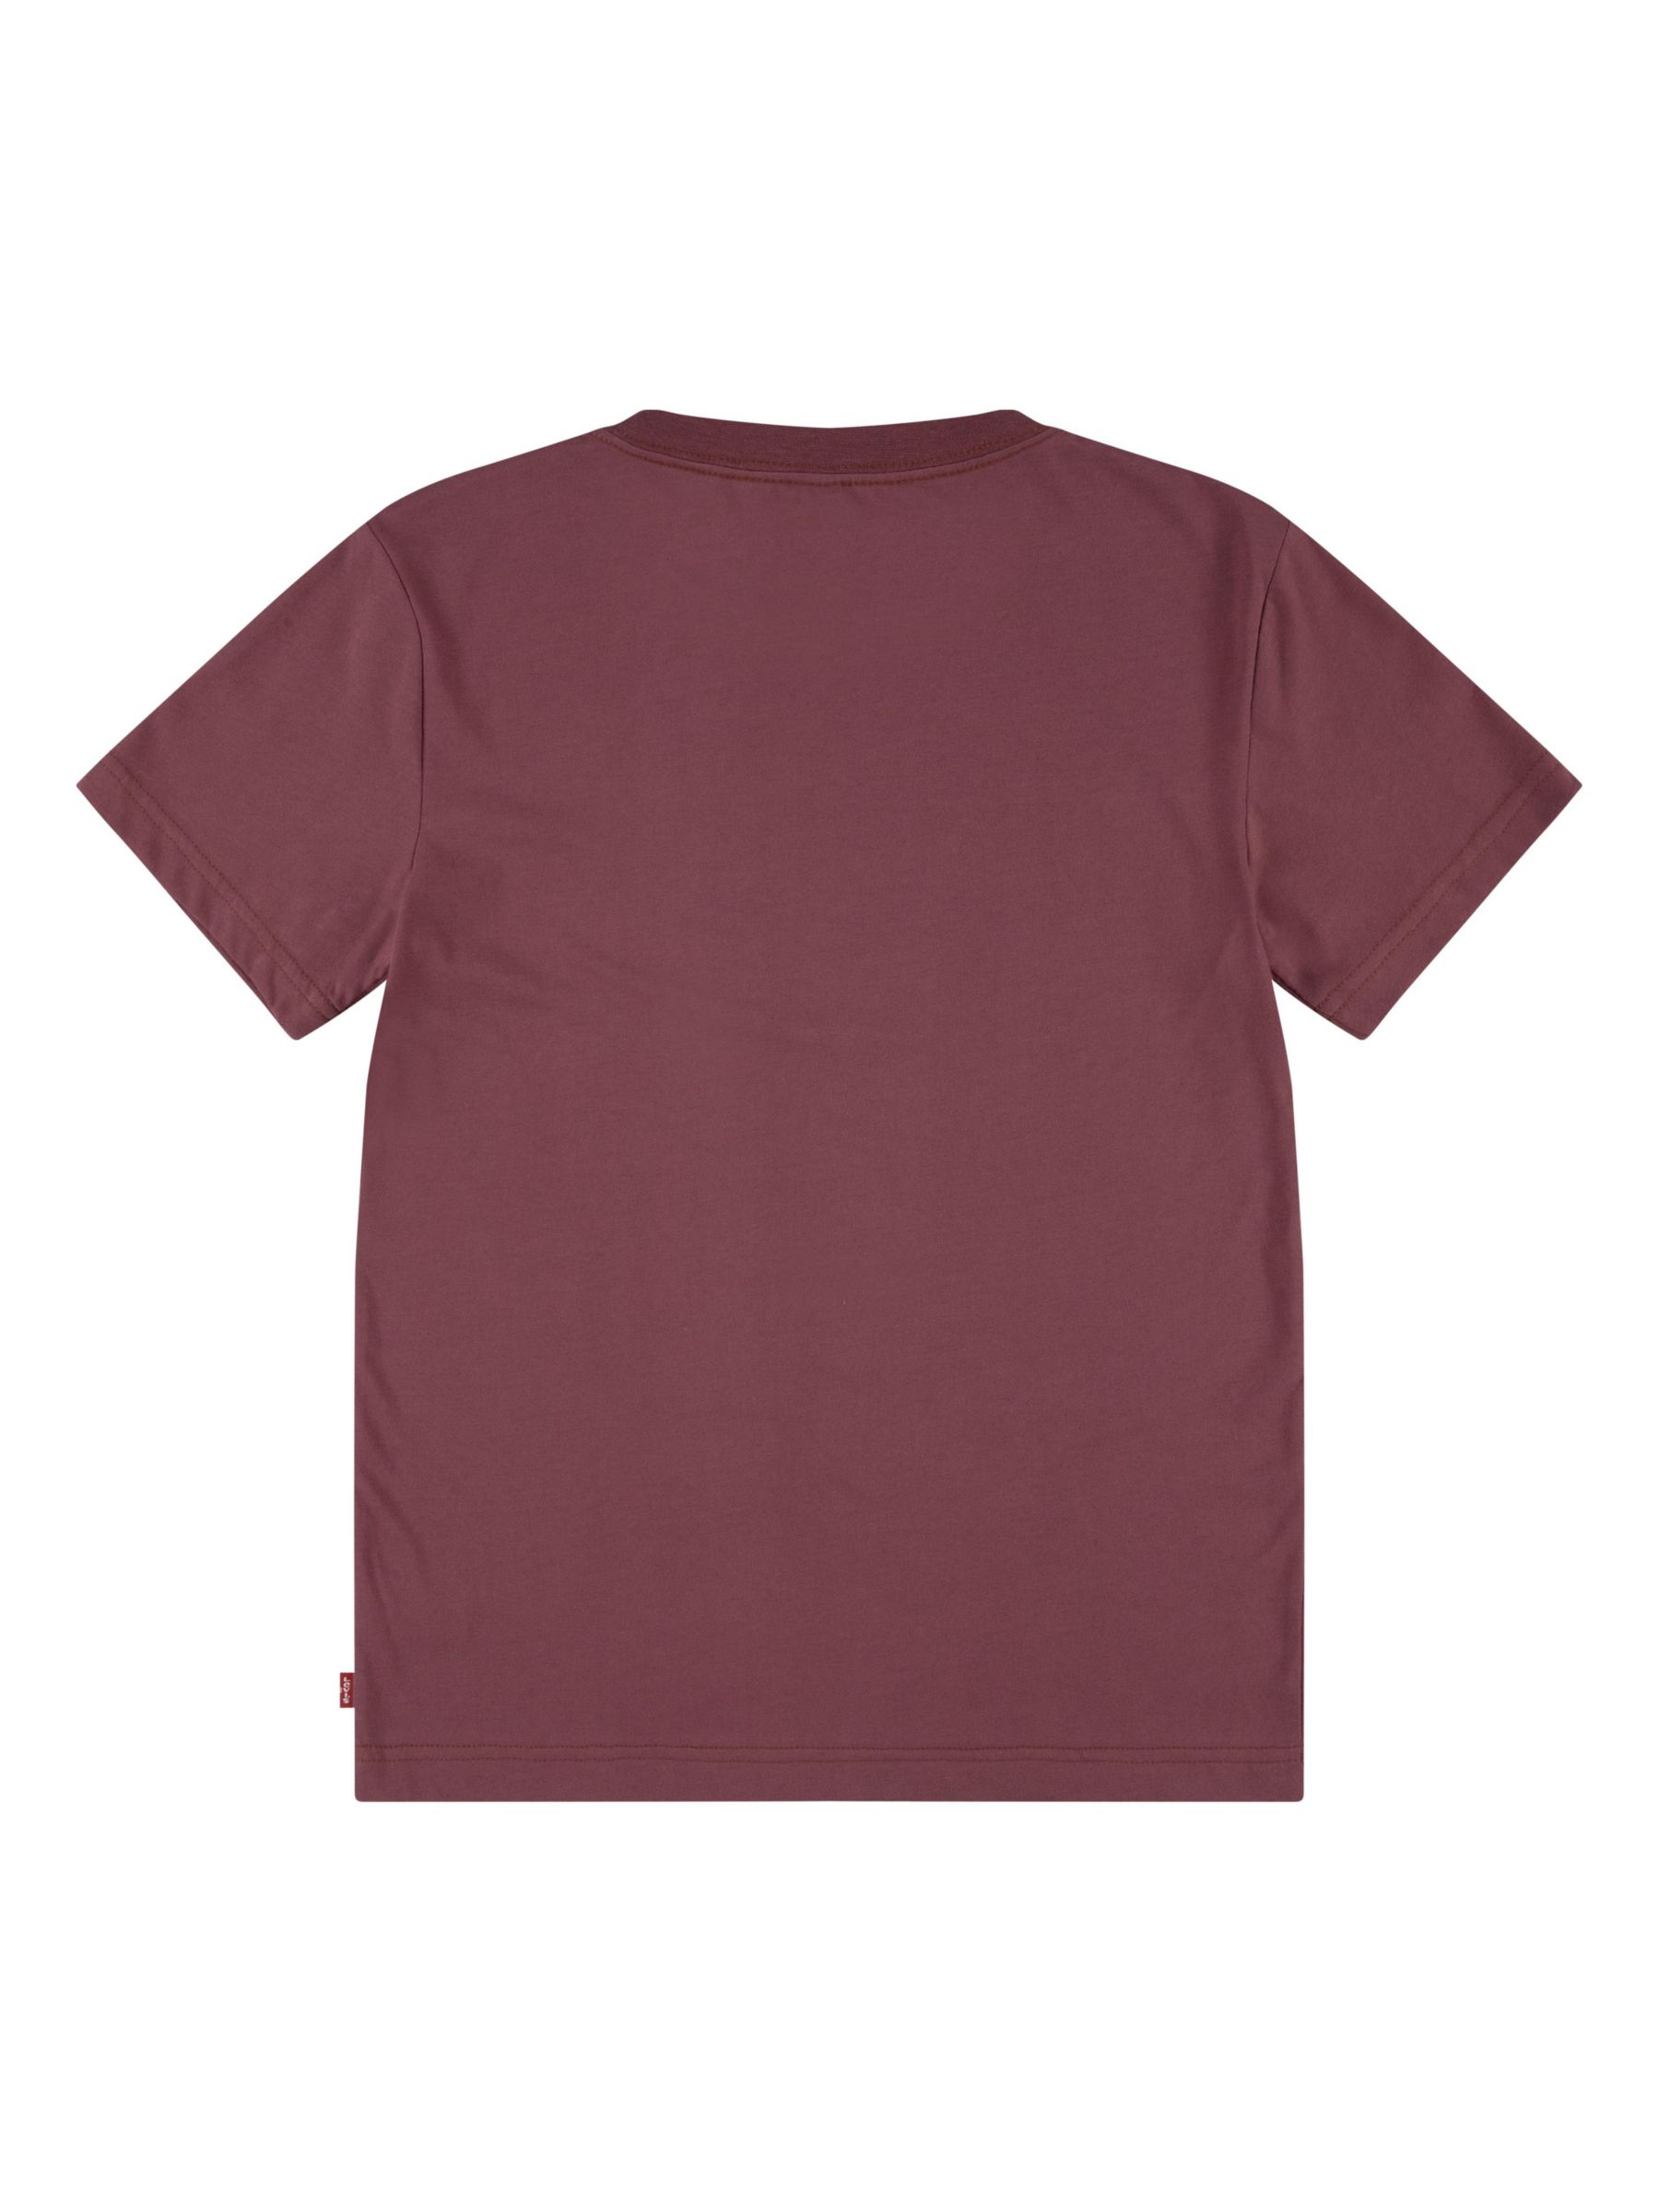 Levi's Kids' All Natural Logo T-Shirt, Roan Rouge, 14 years